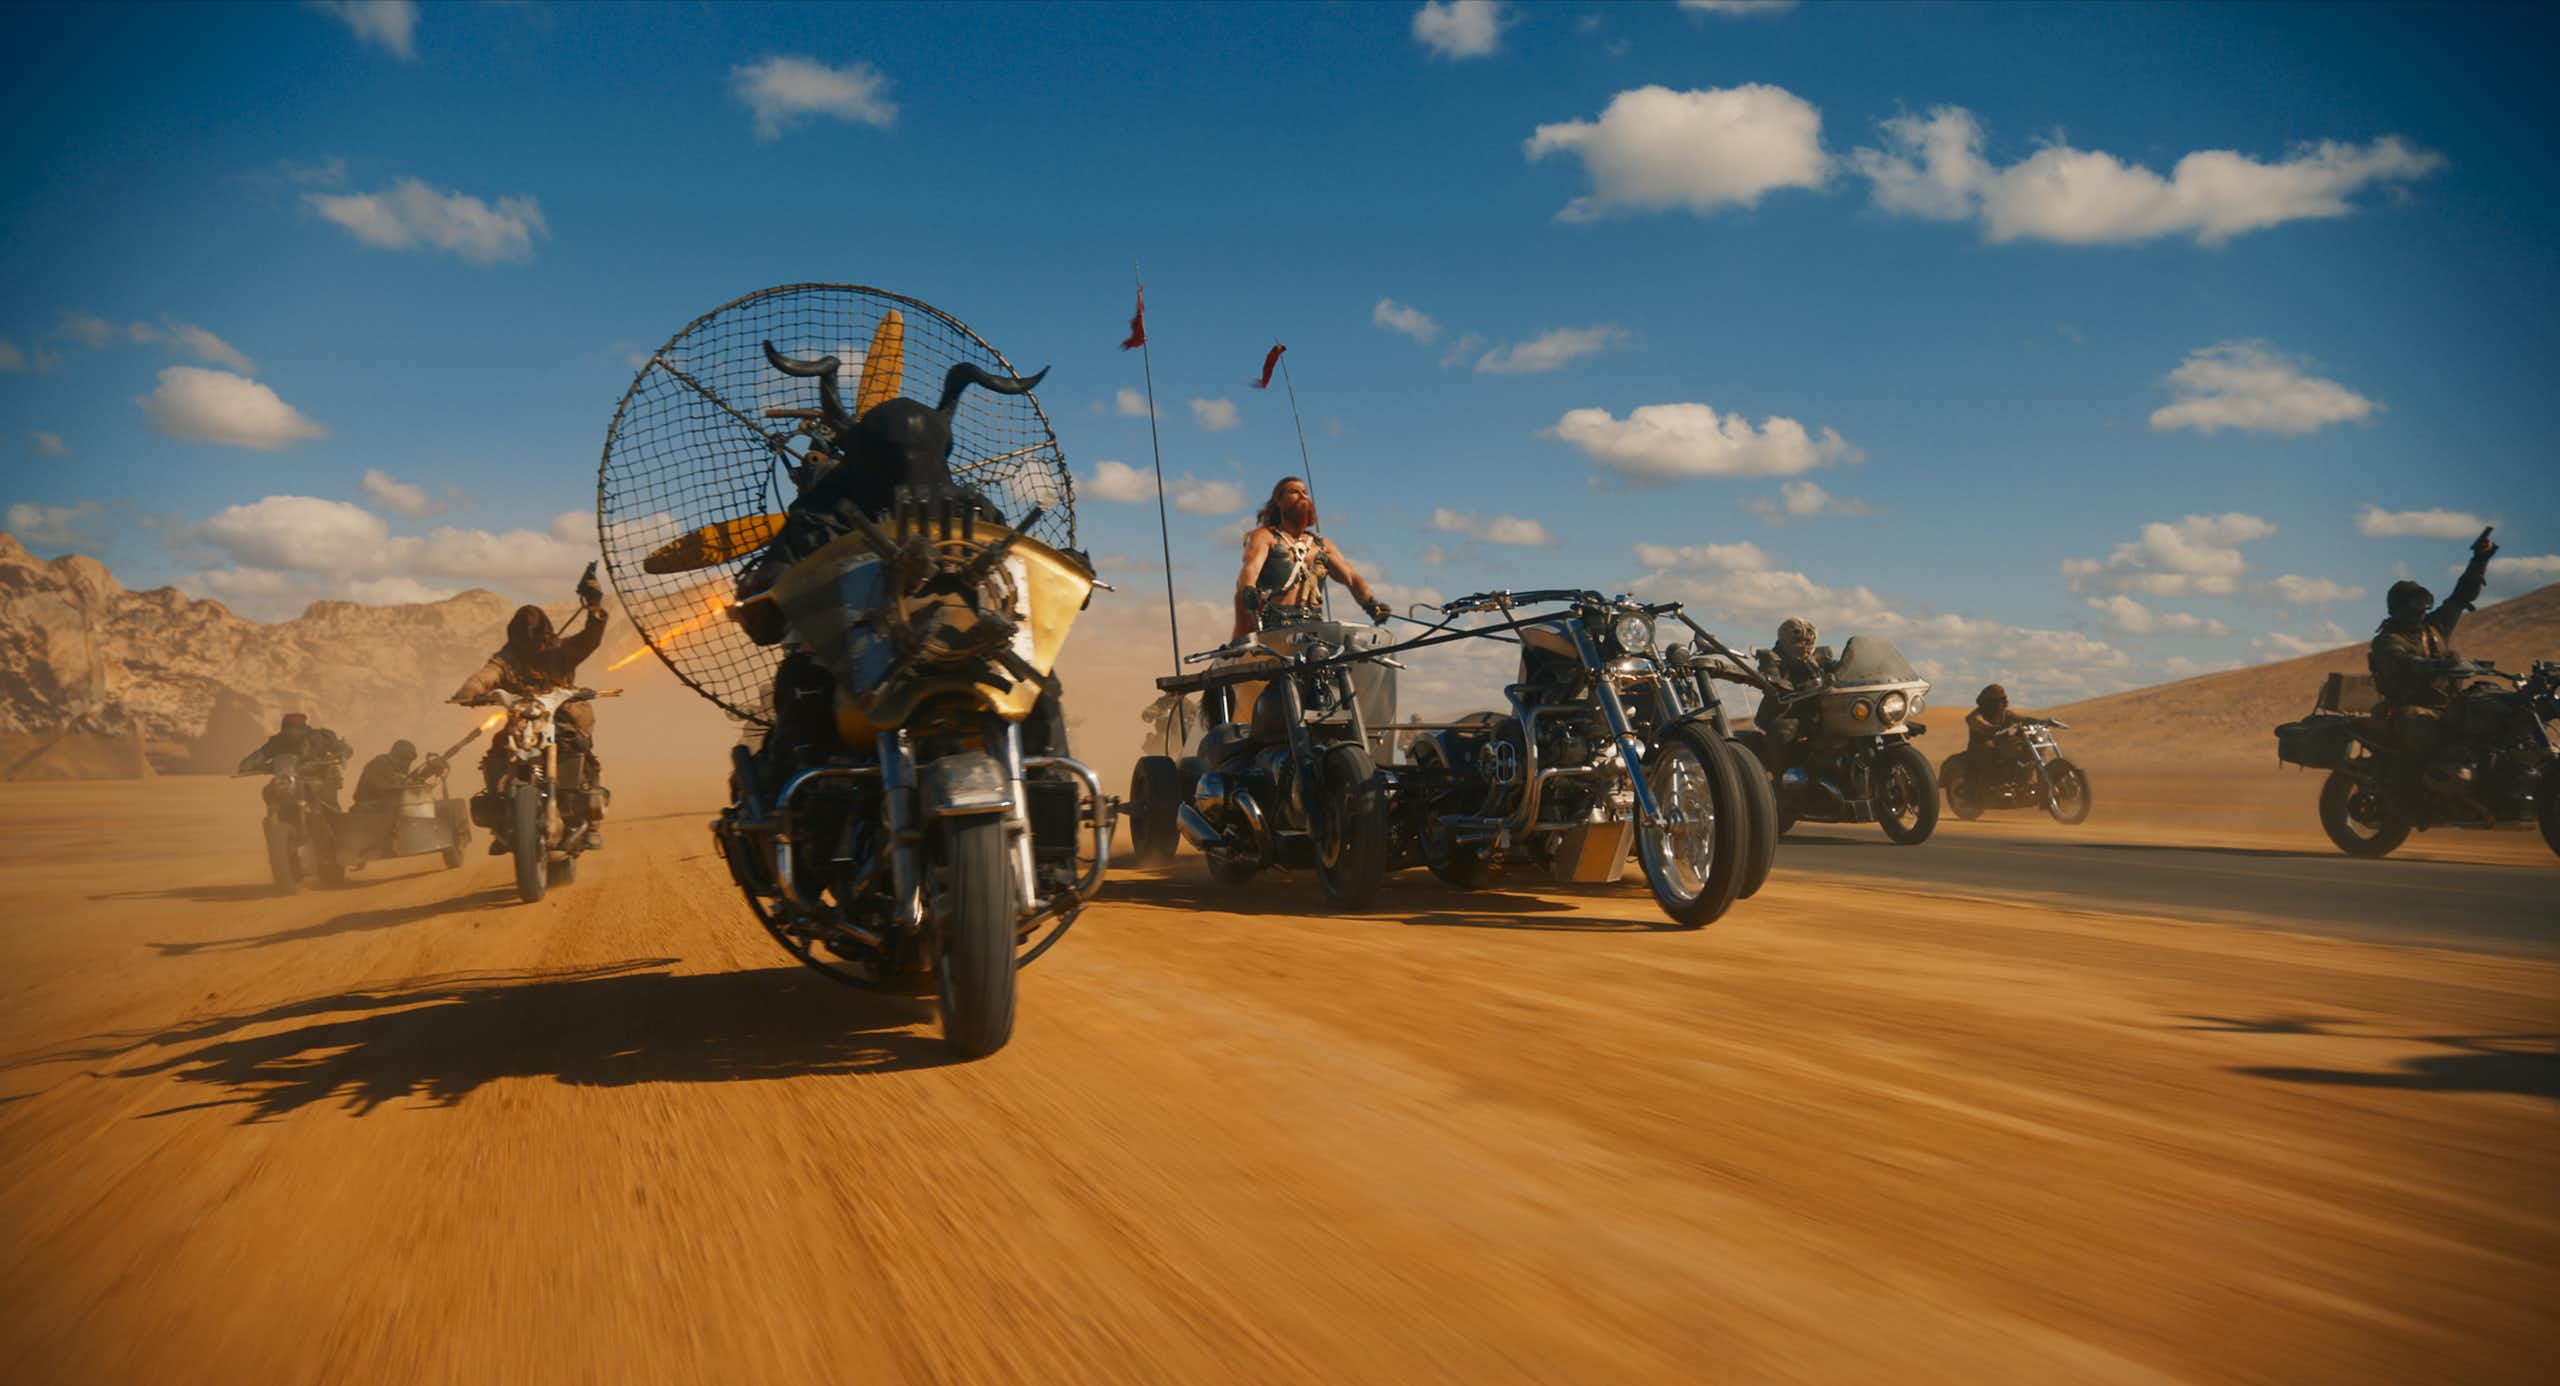 Production image: motorbikes in a desert.